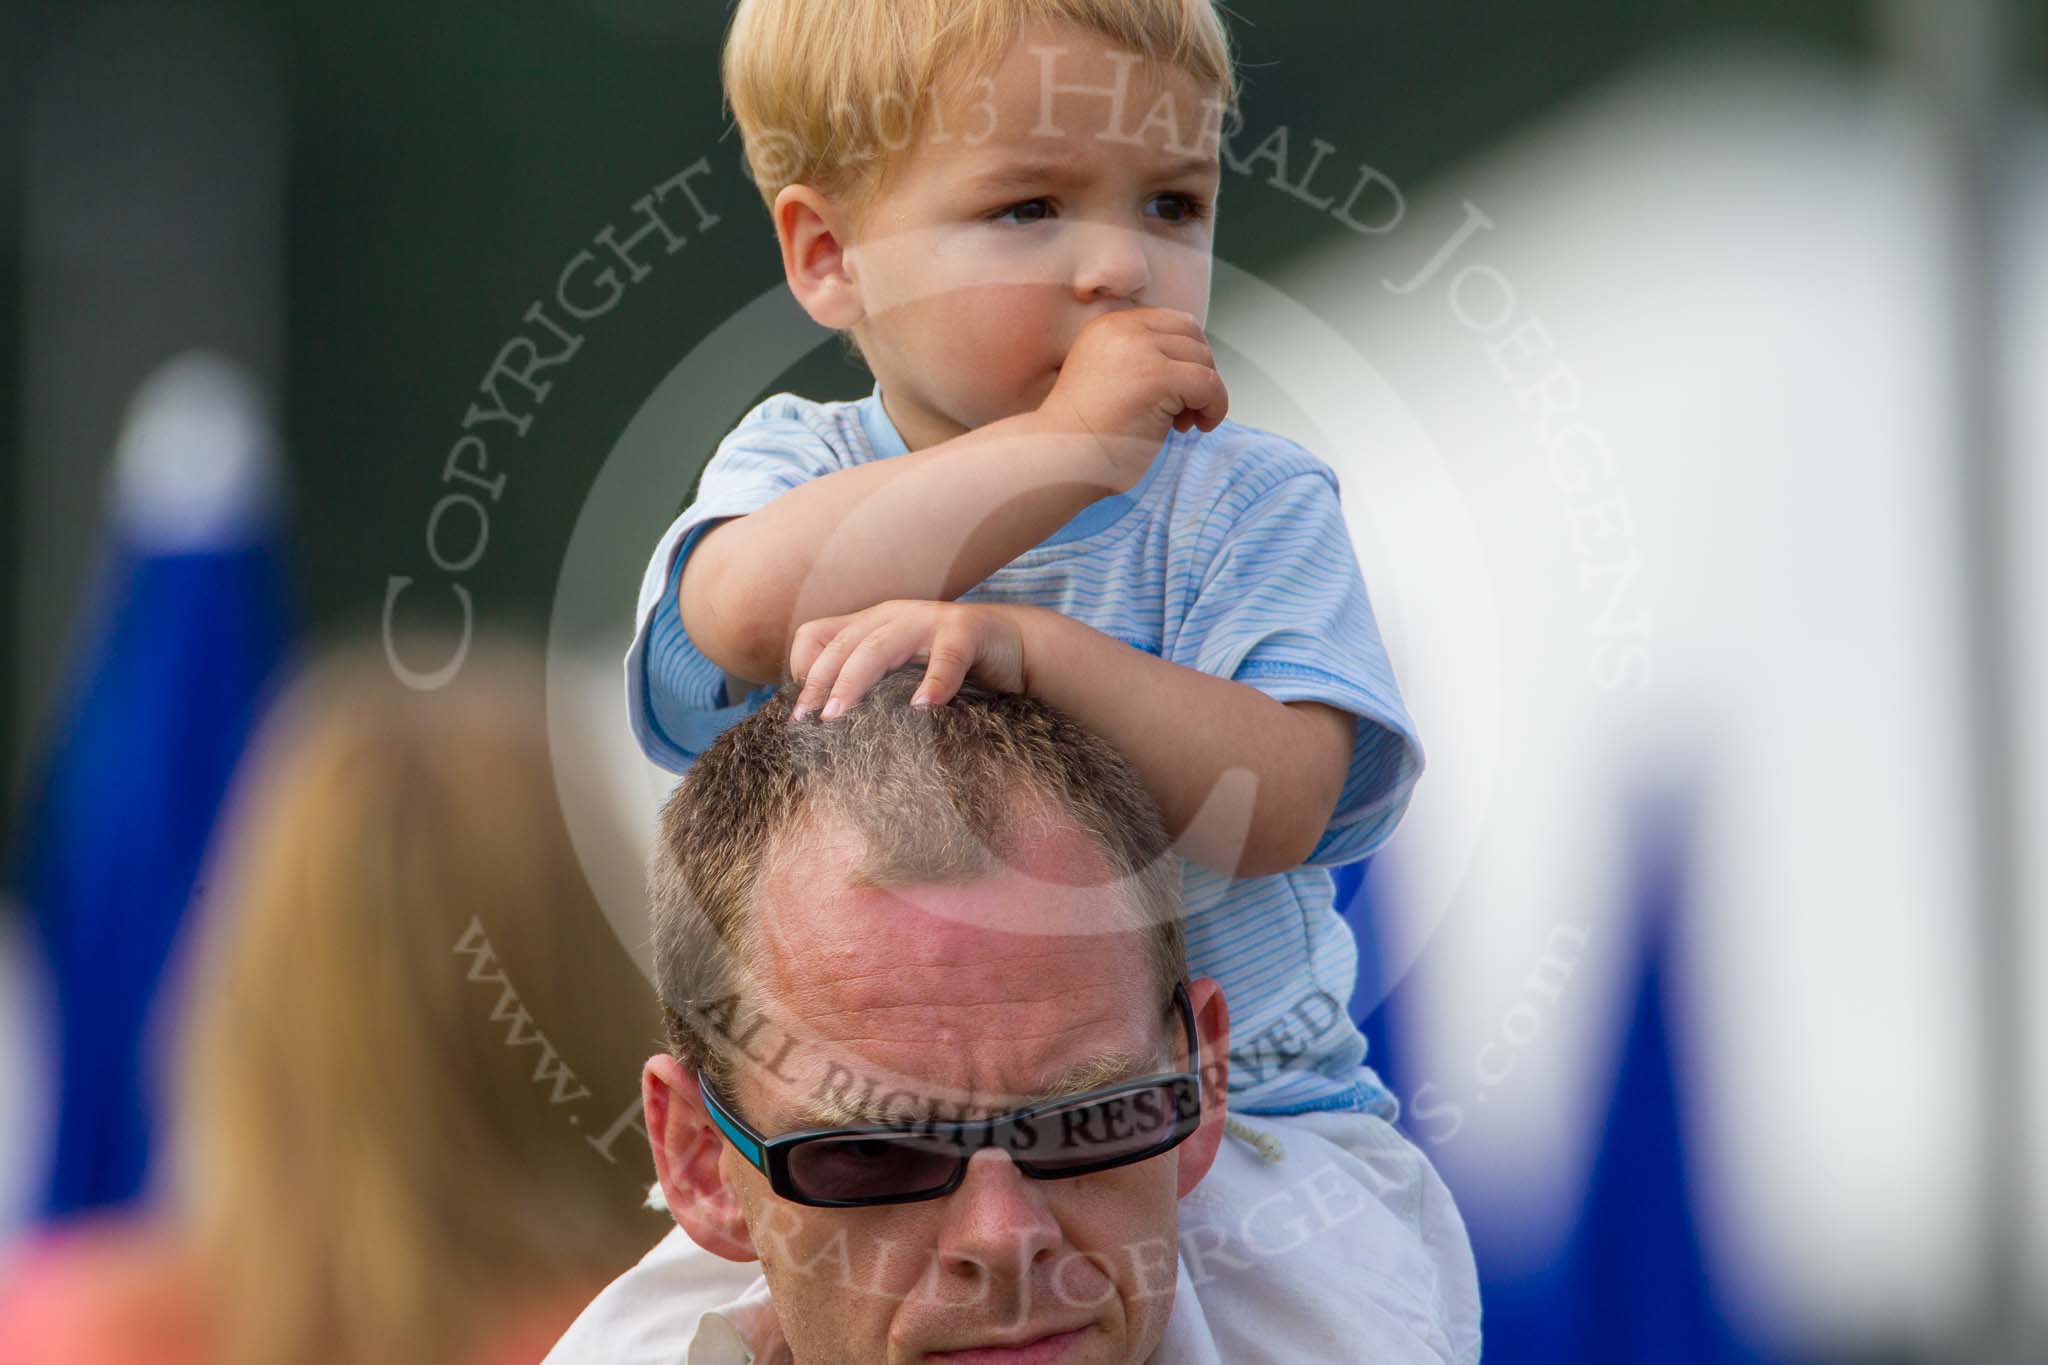 Henley Royal Regatta 2013, Saturday: Watching the race between the German and the British coxed four for the Britannia Challenge Cup, a young man on his father's shoulders. Image #72, 06 July 2013 10:01 River Thames, Henley on Thames, UK